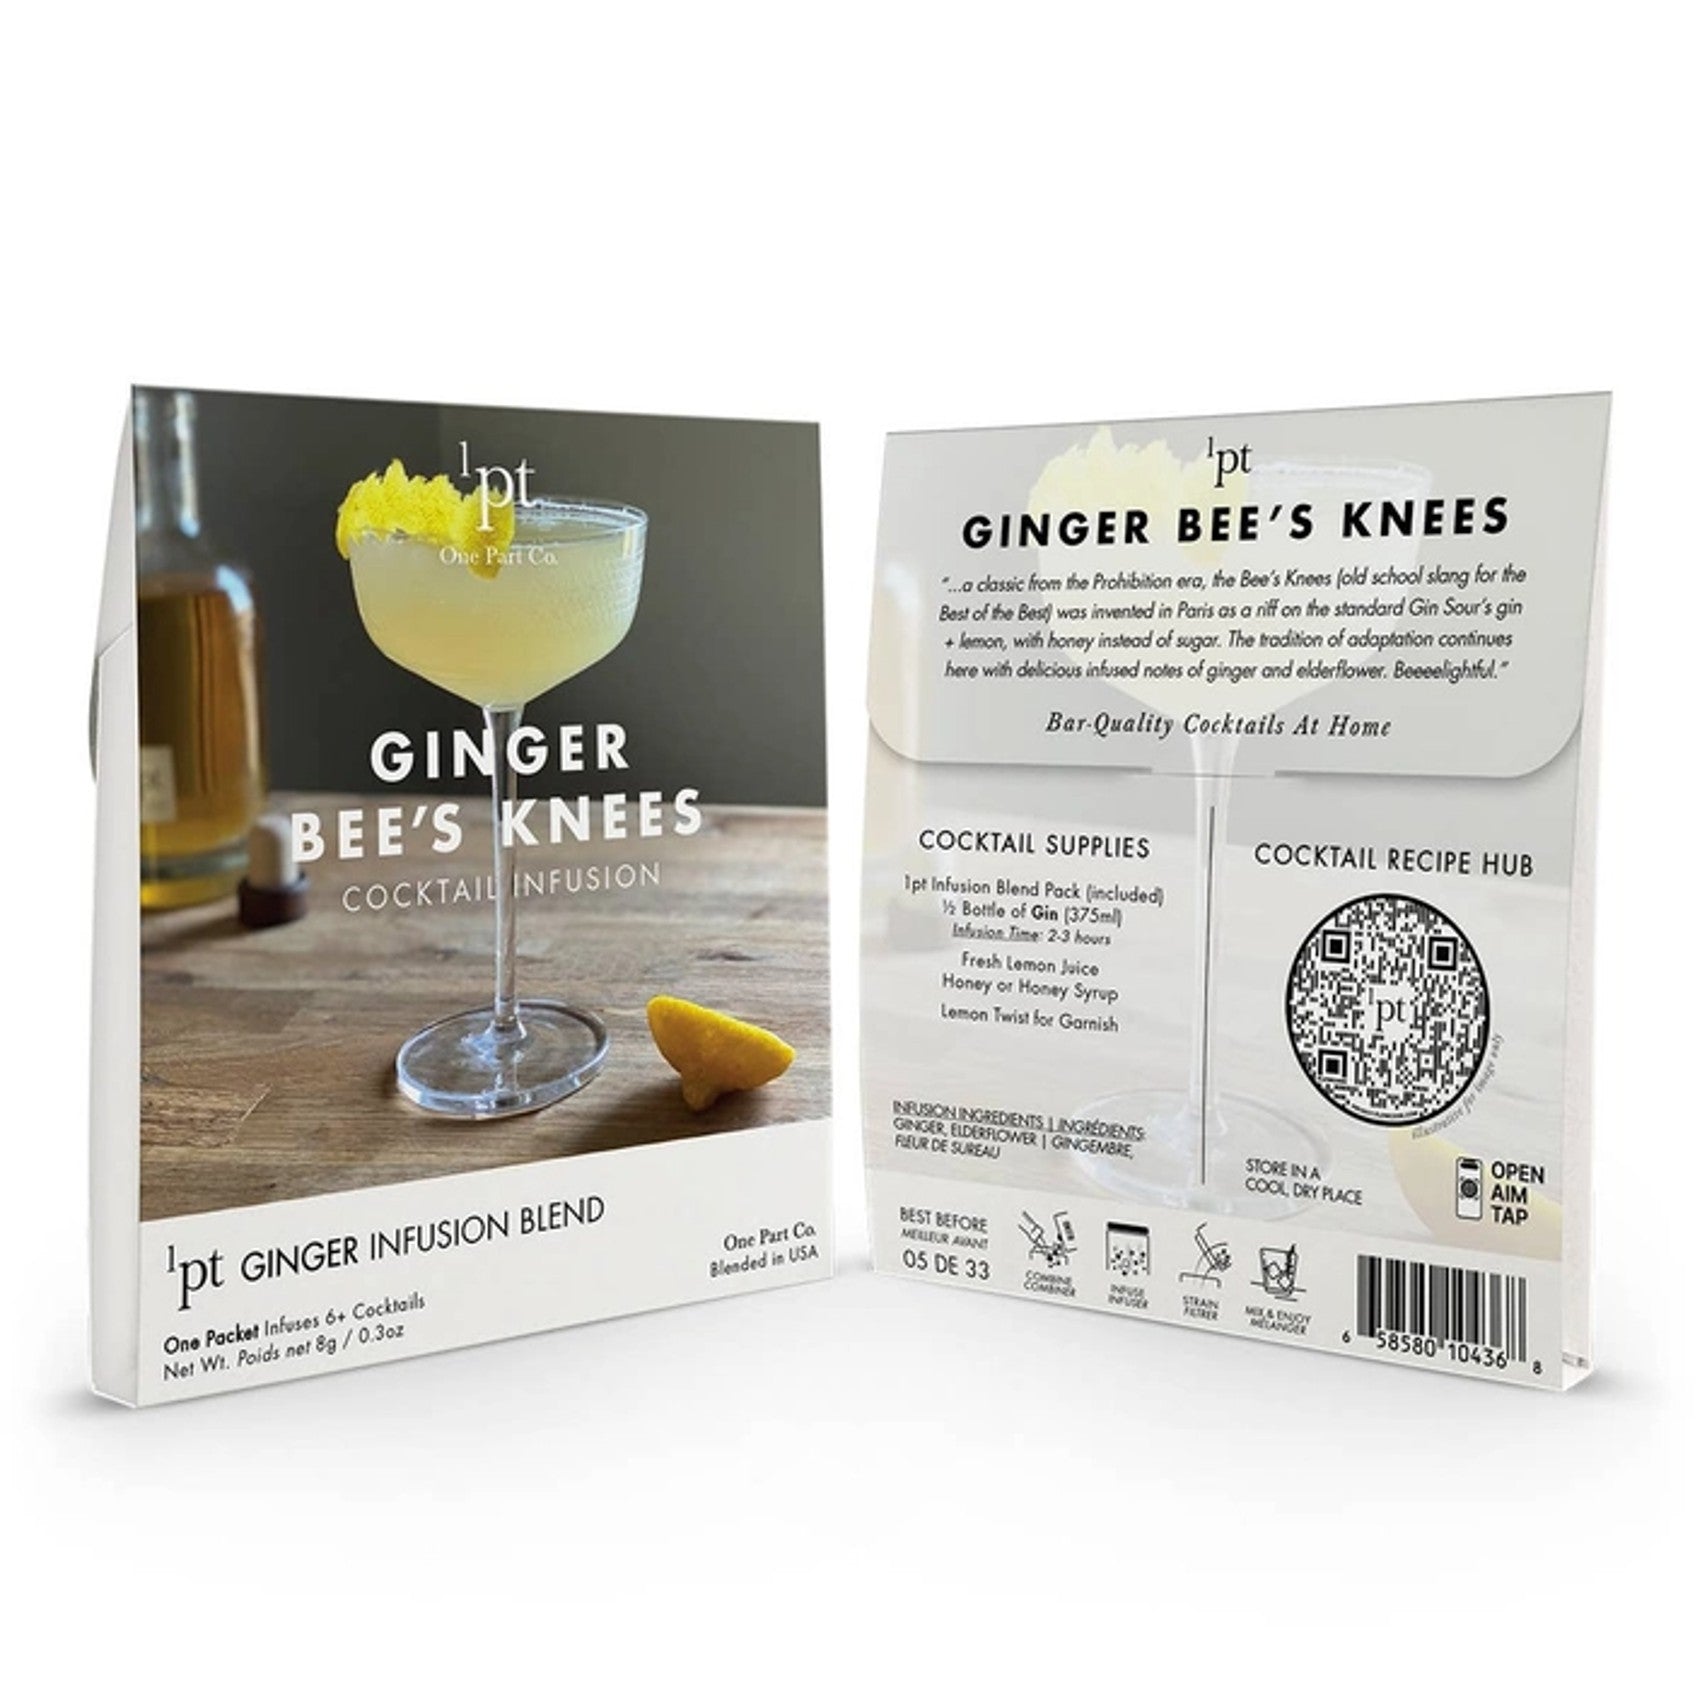 Ginger Bee's Knees Cocktail Infusion Pack